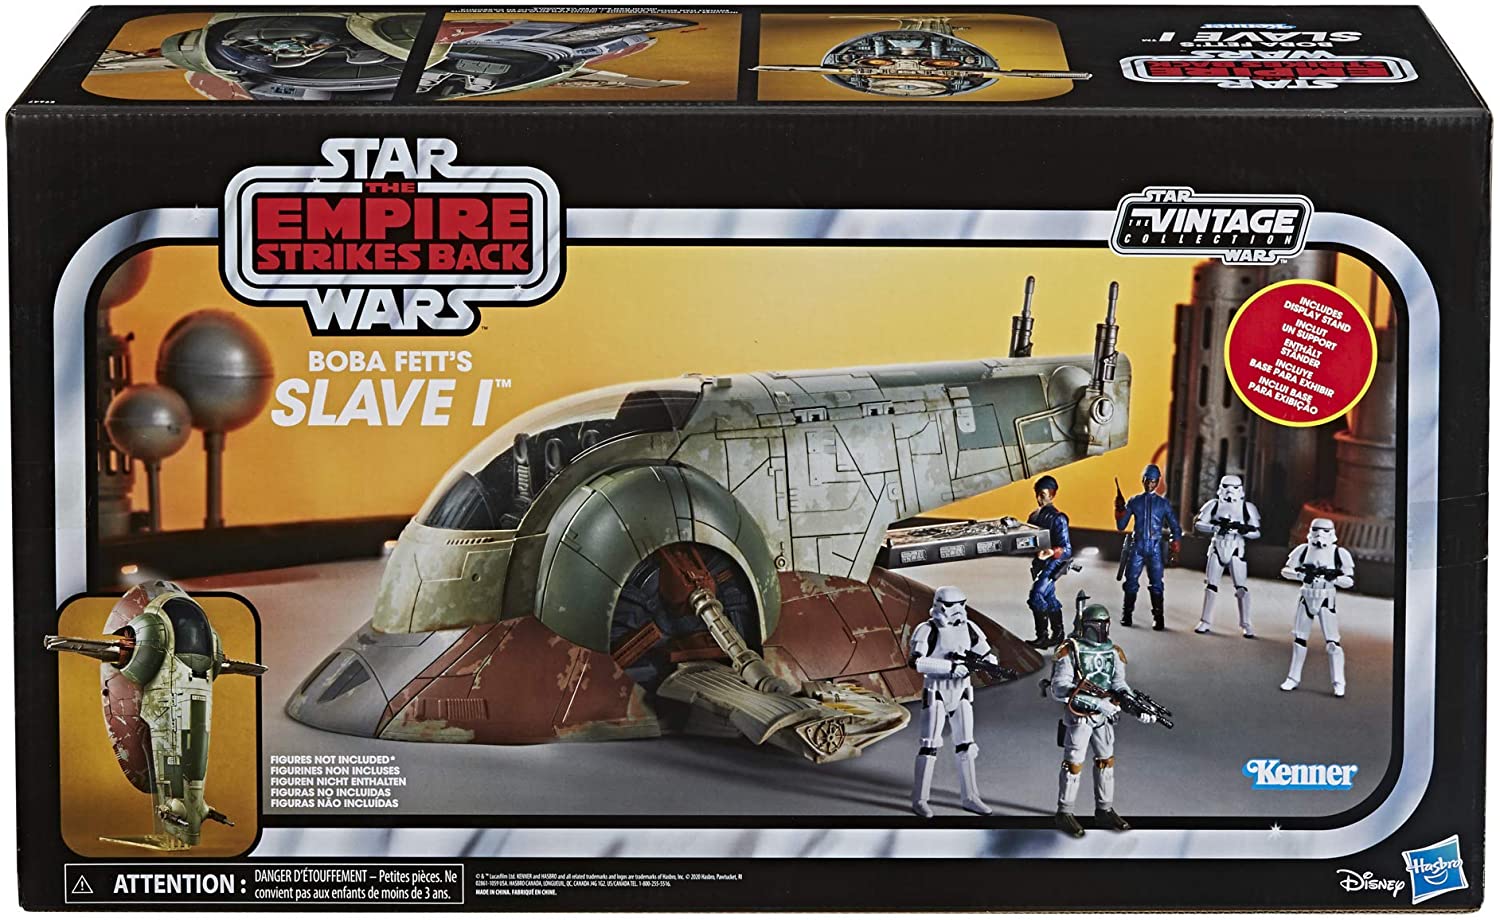 Star Wars The Vintage Collection Boba Fett Slave I 1 Toy Vehicle NIB In Stock 